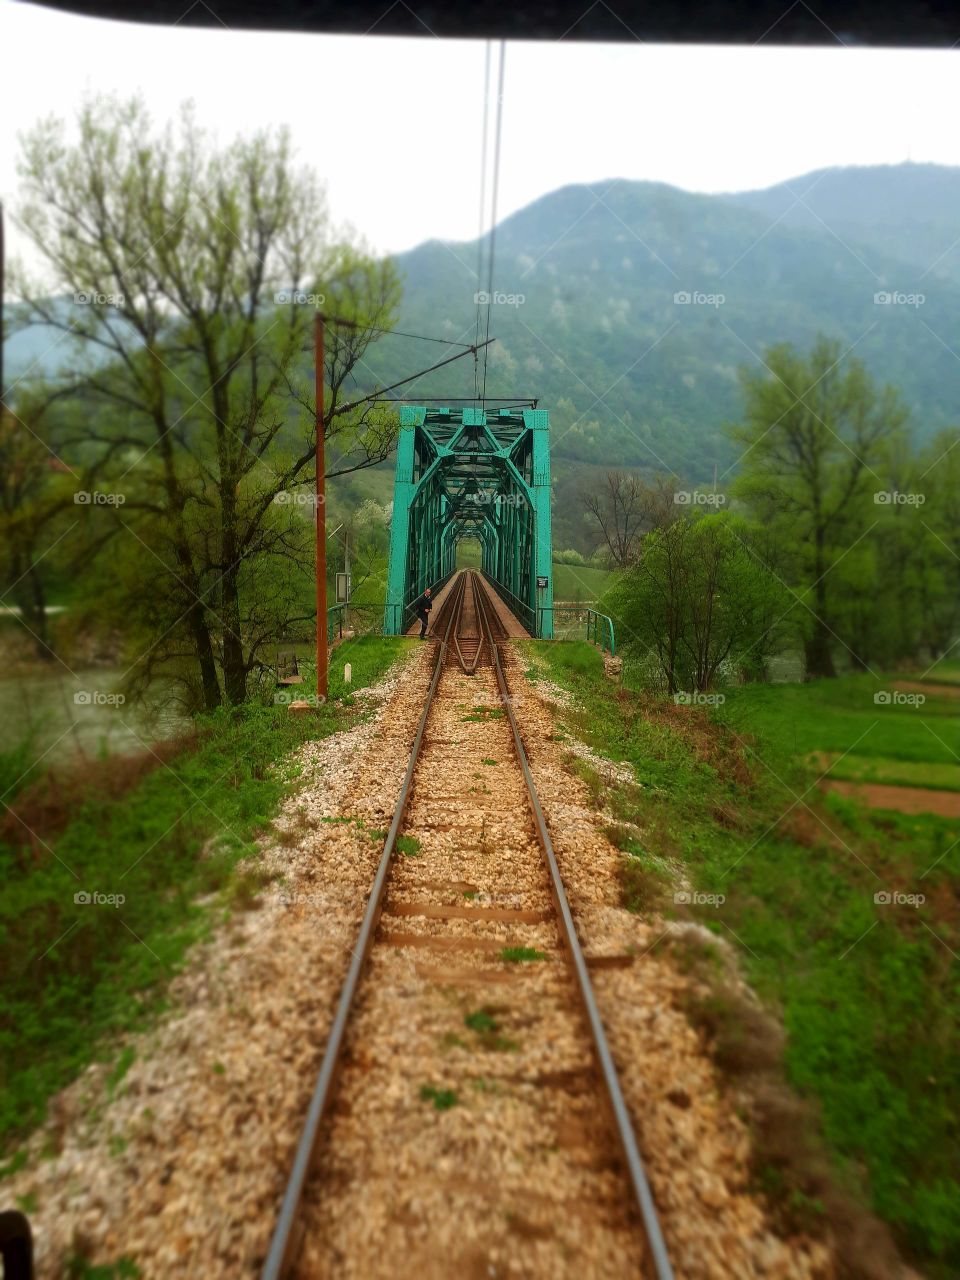 A view from the window of the last passenger wagon to the railway green bridge on the river of Bosna.